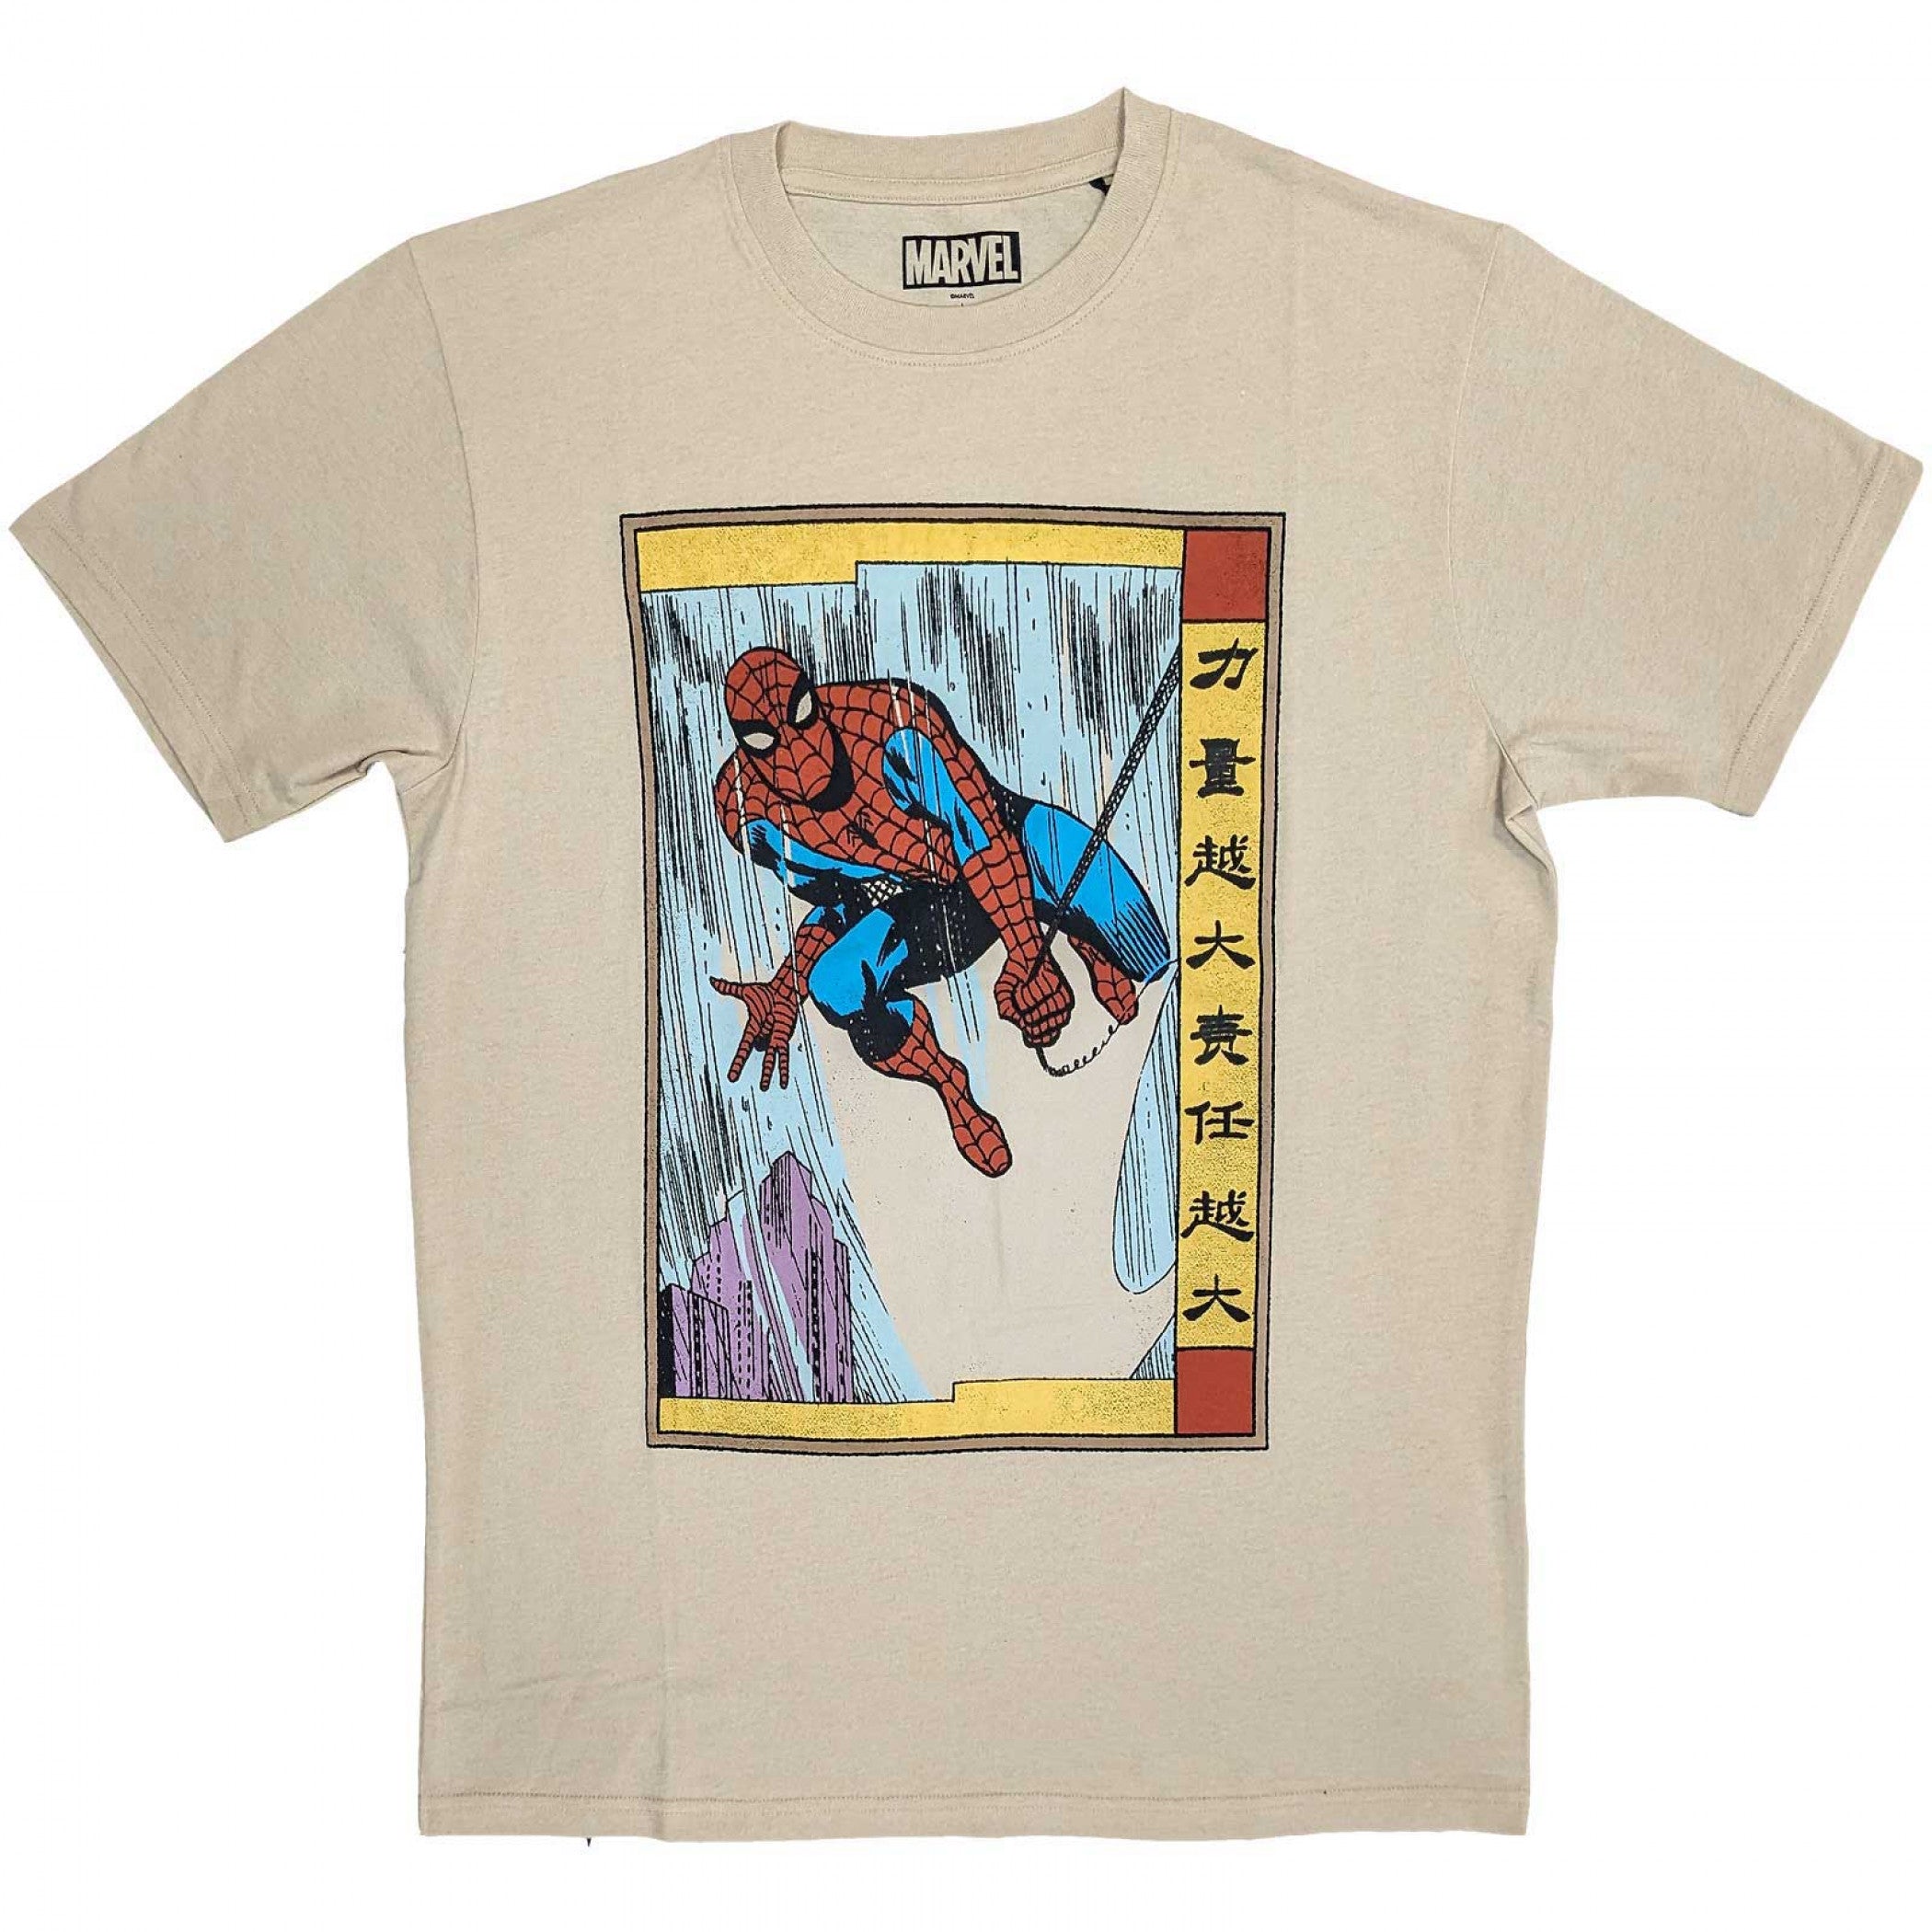 Spider-Man with Great Power Comes Great Responsibility Chinese T-Shirt